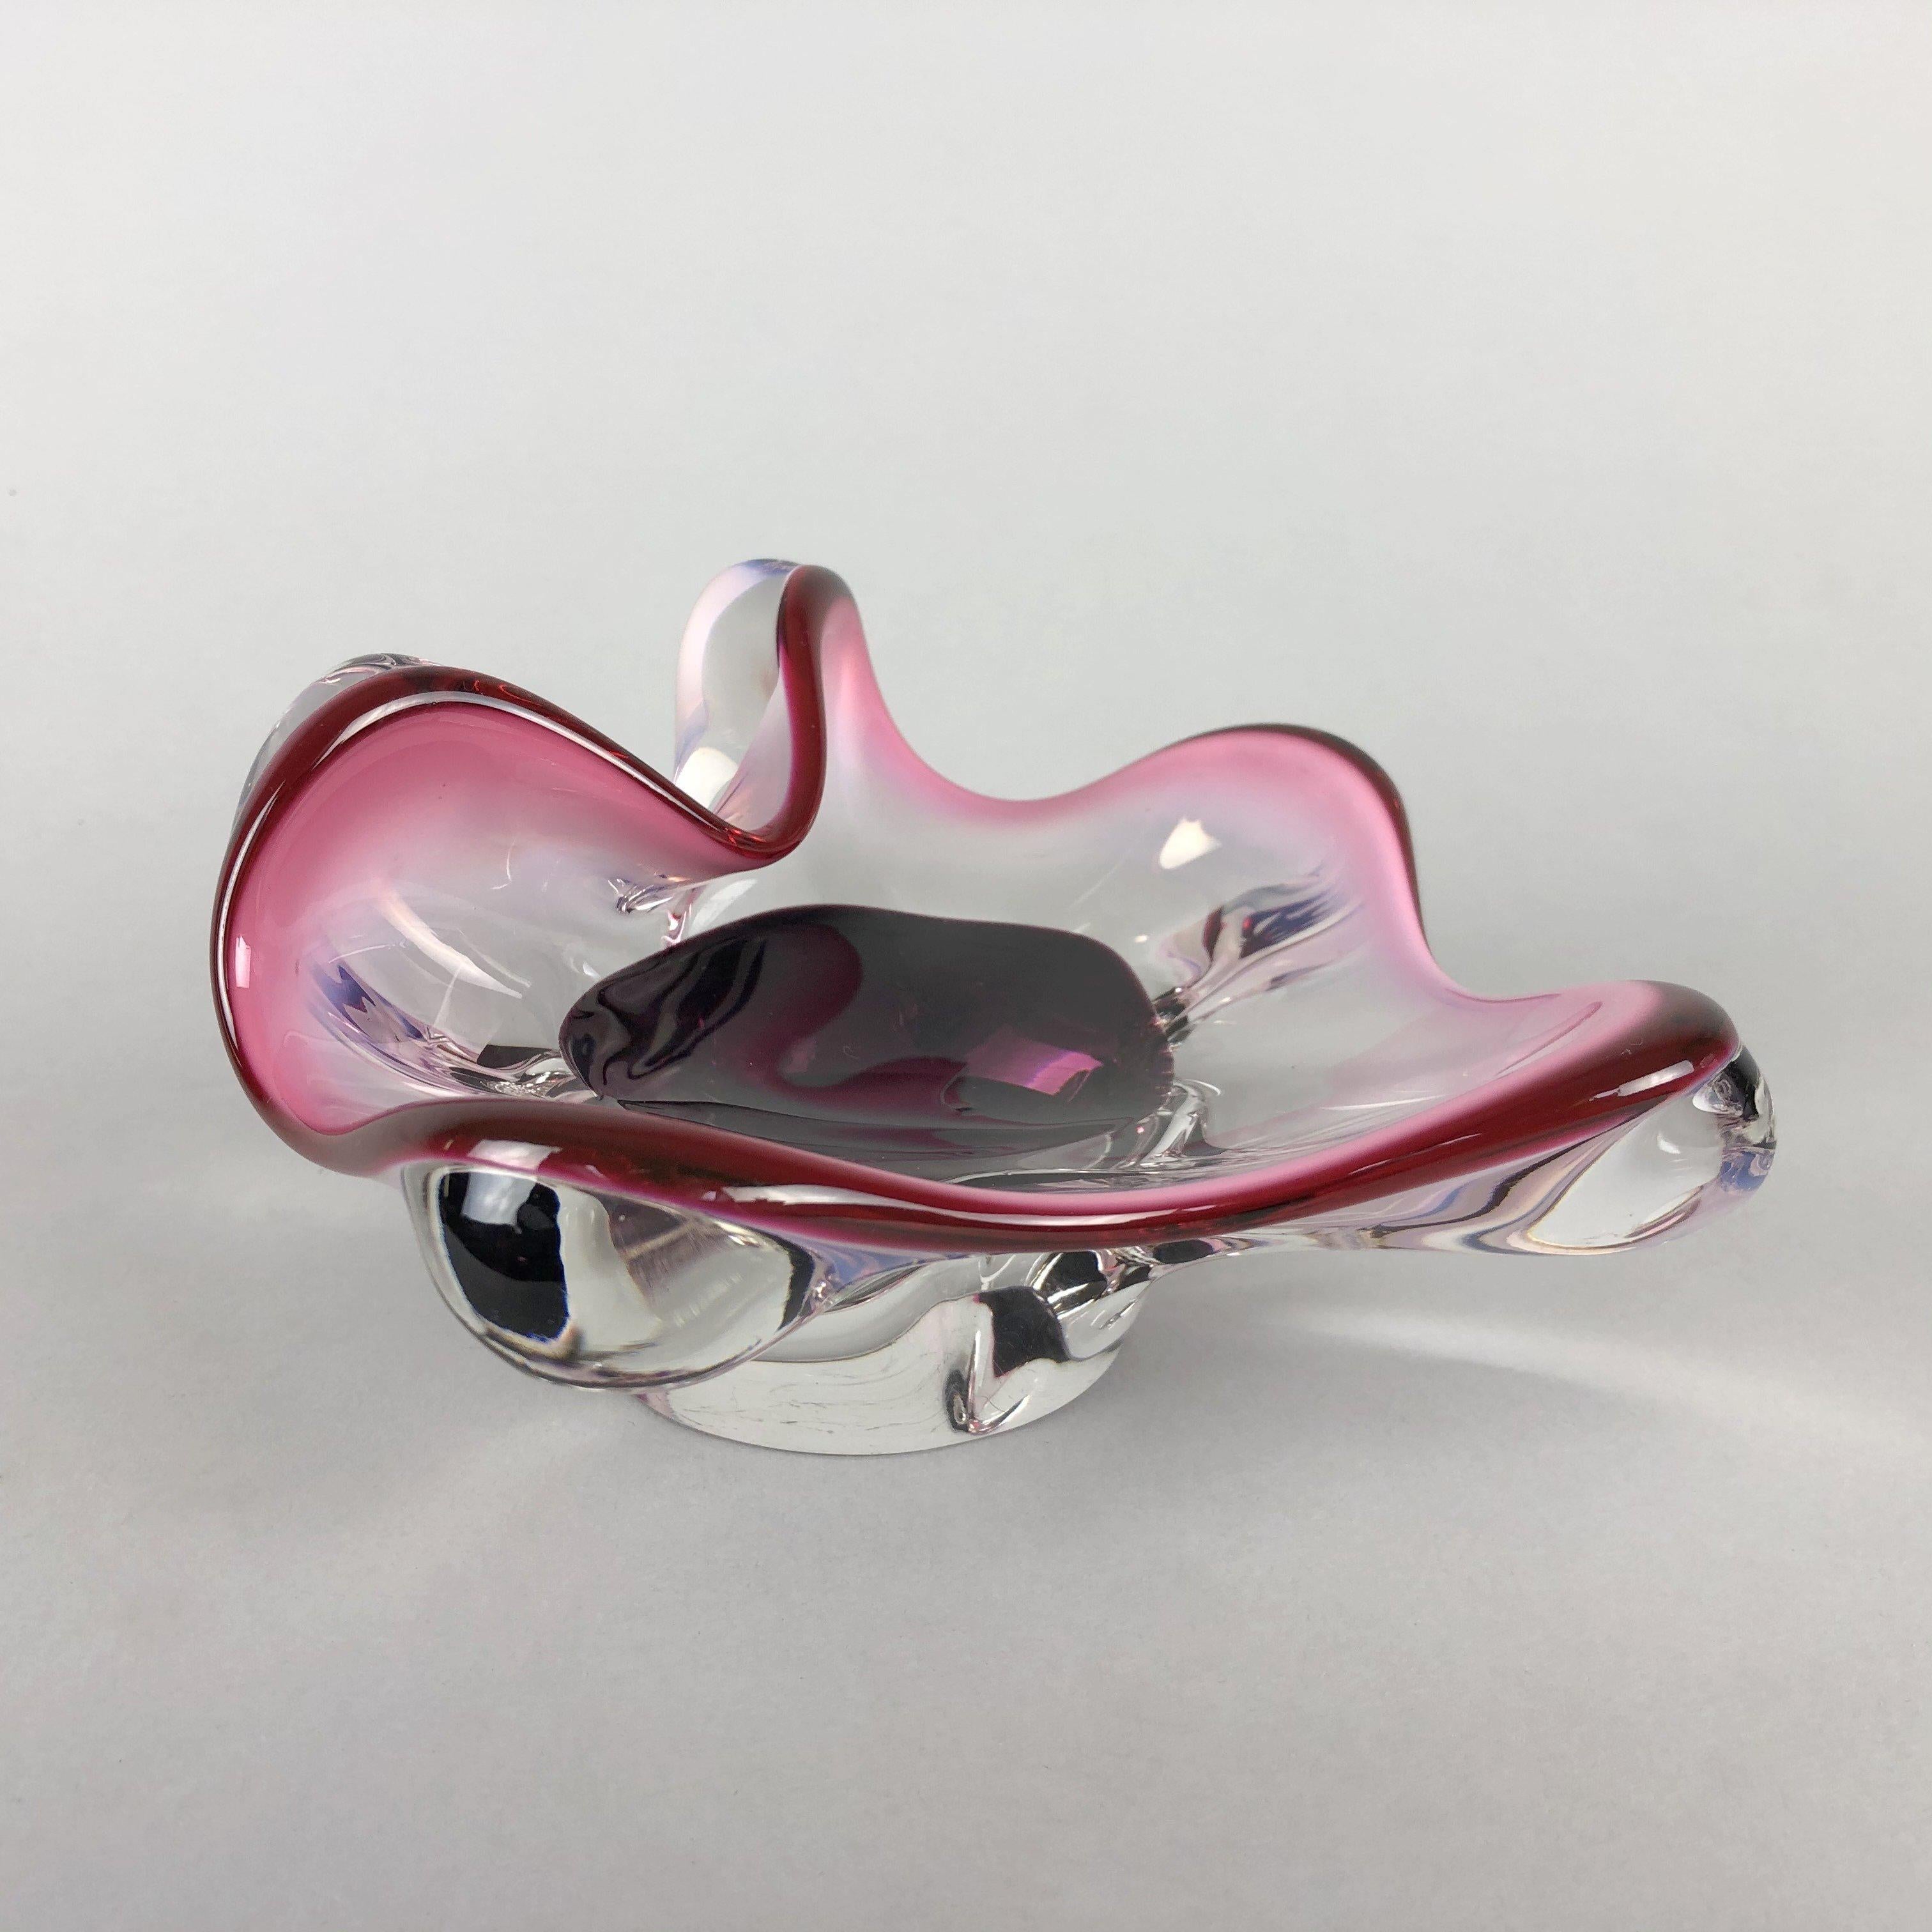 Small Czech sculptural glass bowl, designed by Josef Hospodka in the 1960's and made by the Chribska glassworks. The bowl is aproximatelly 8 cm (3.15 inch) high (at the highest point and 16 cm (6.3 inch) wide (at the widest point). The weight is